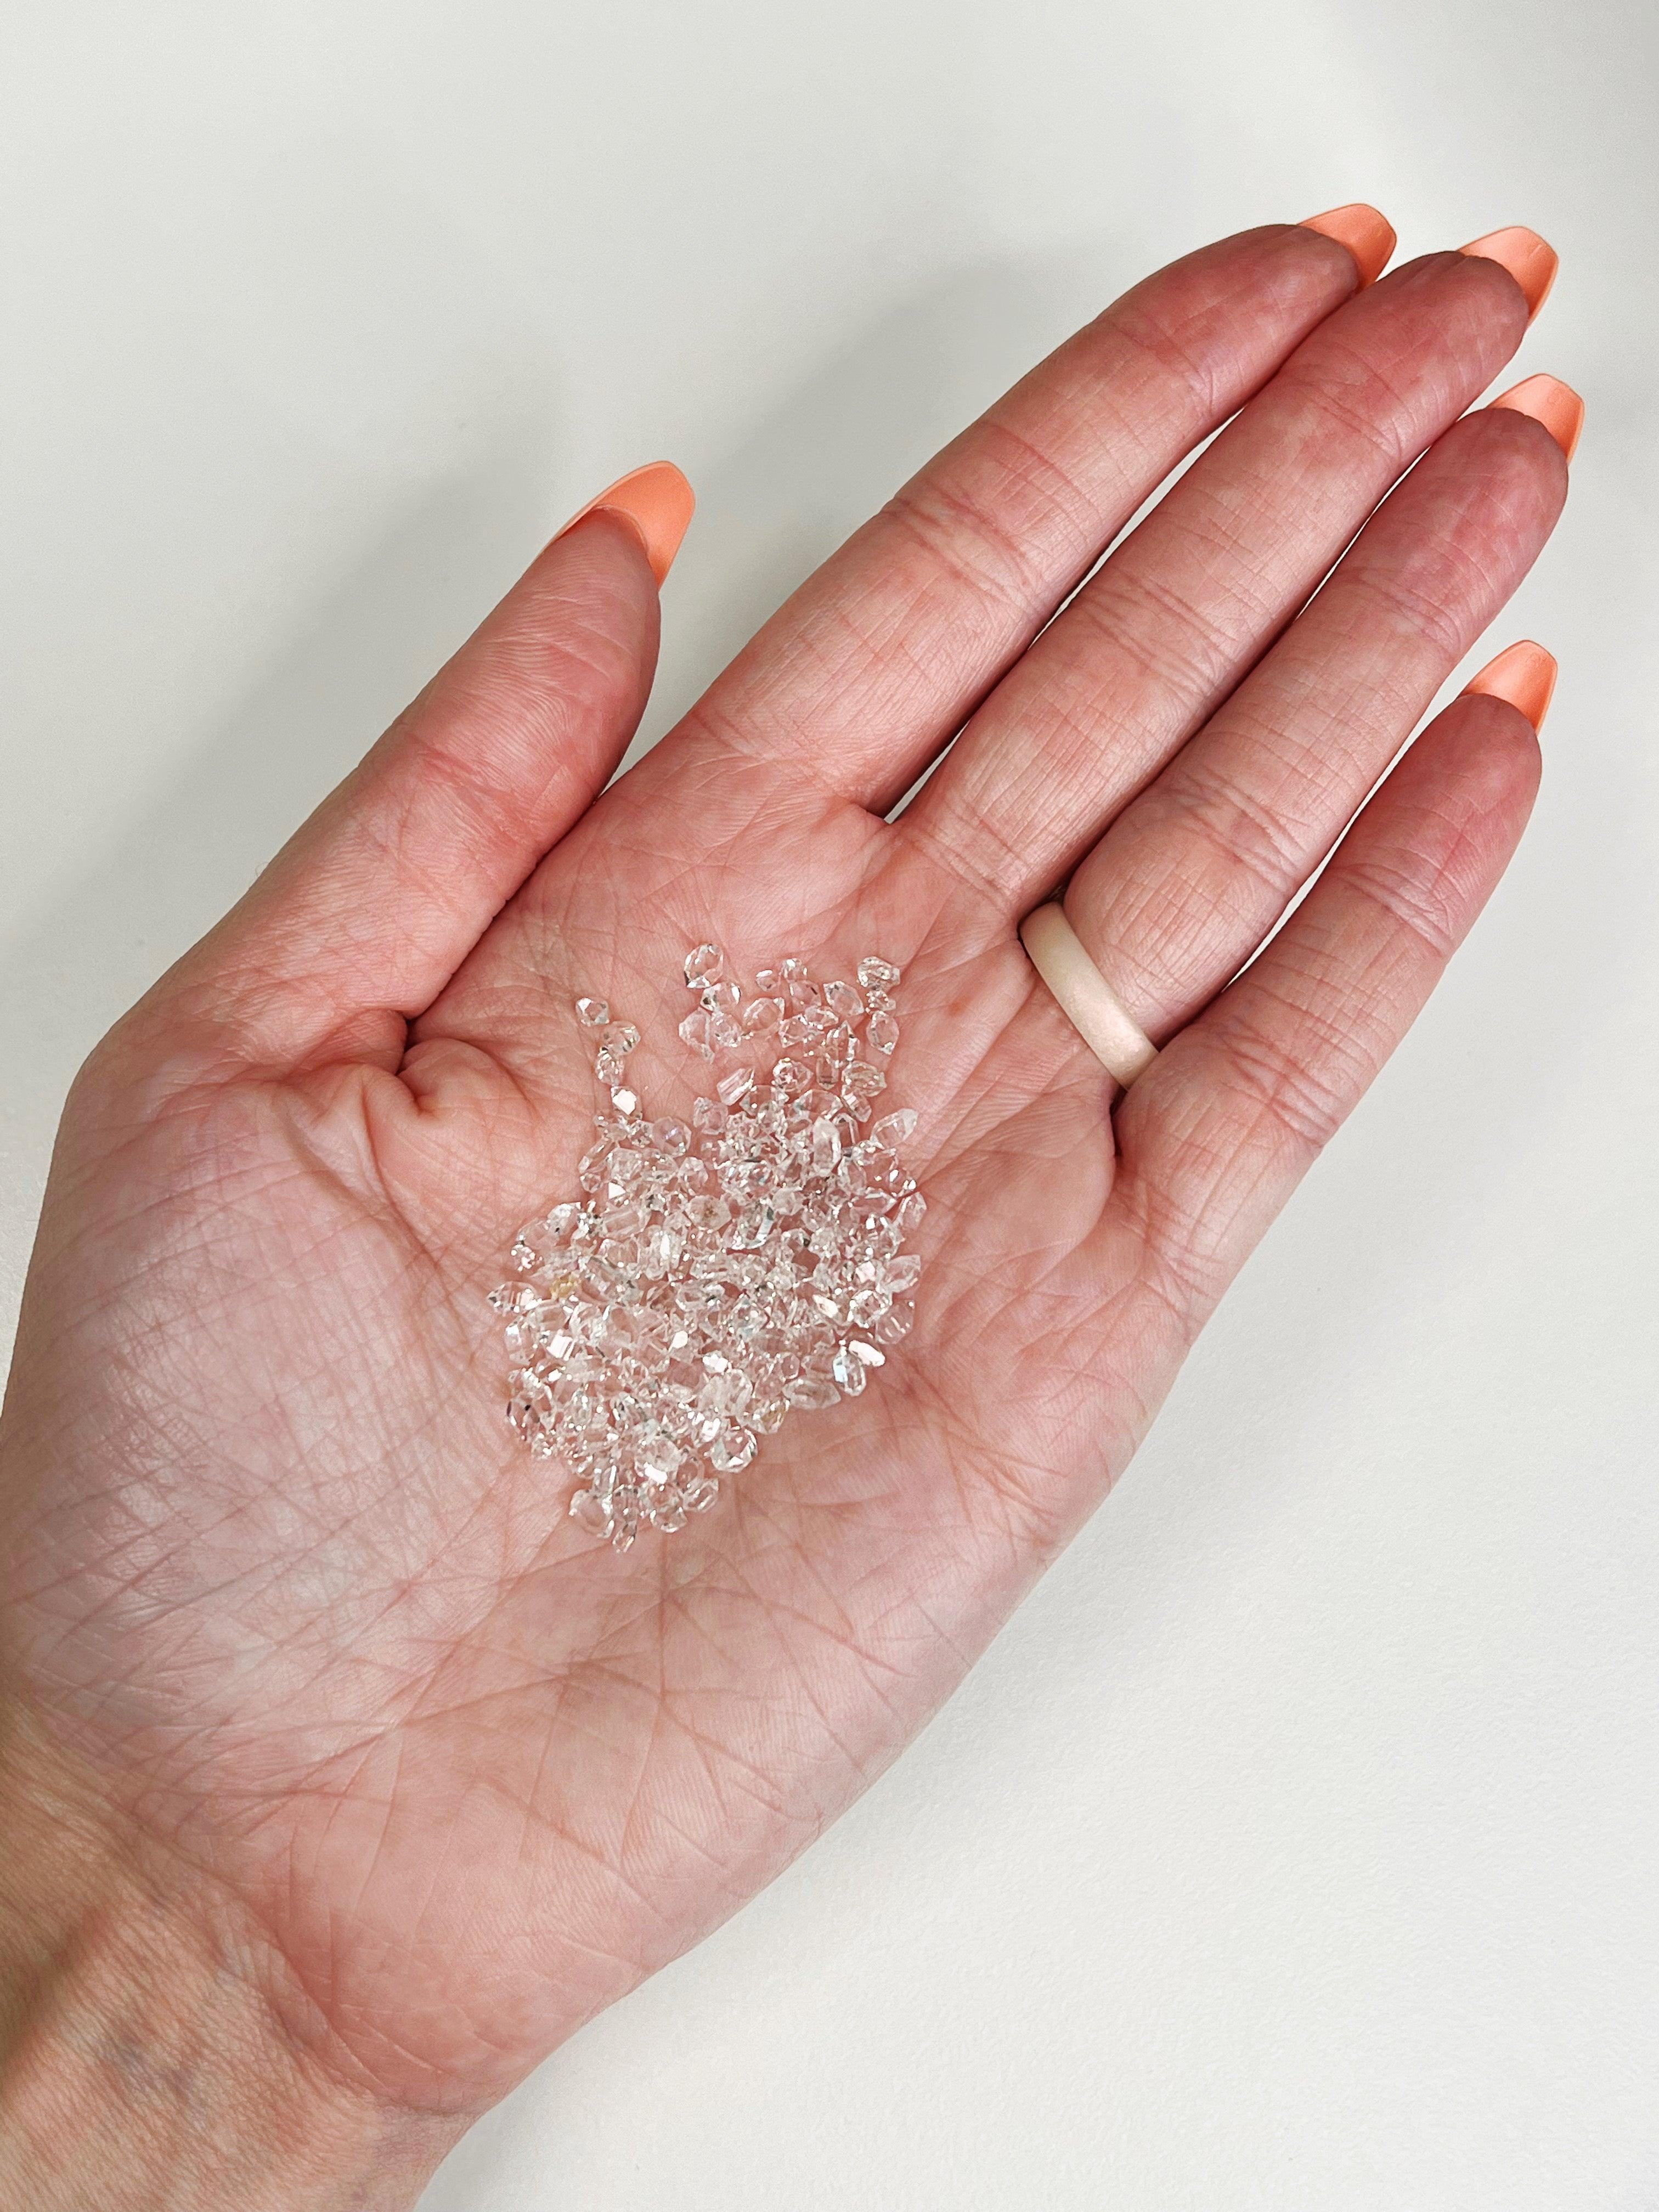 PAKIMER "DIAMOND DUST" BAGGIE (5g) - 33 bday, 444 sale, baggie, diamond dust, emotional support, end of year sale, gridding, herkimer, herkimer diamond, holiday sale, new year sale, pakimer, pocket crystal, pocket crystals, transform gift bundle - The Mineral Maven